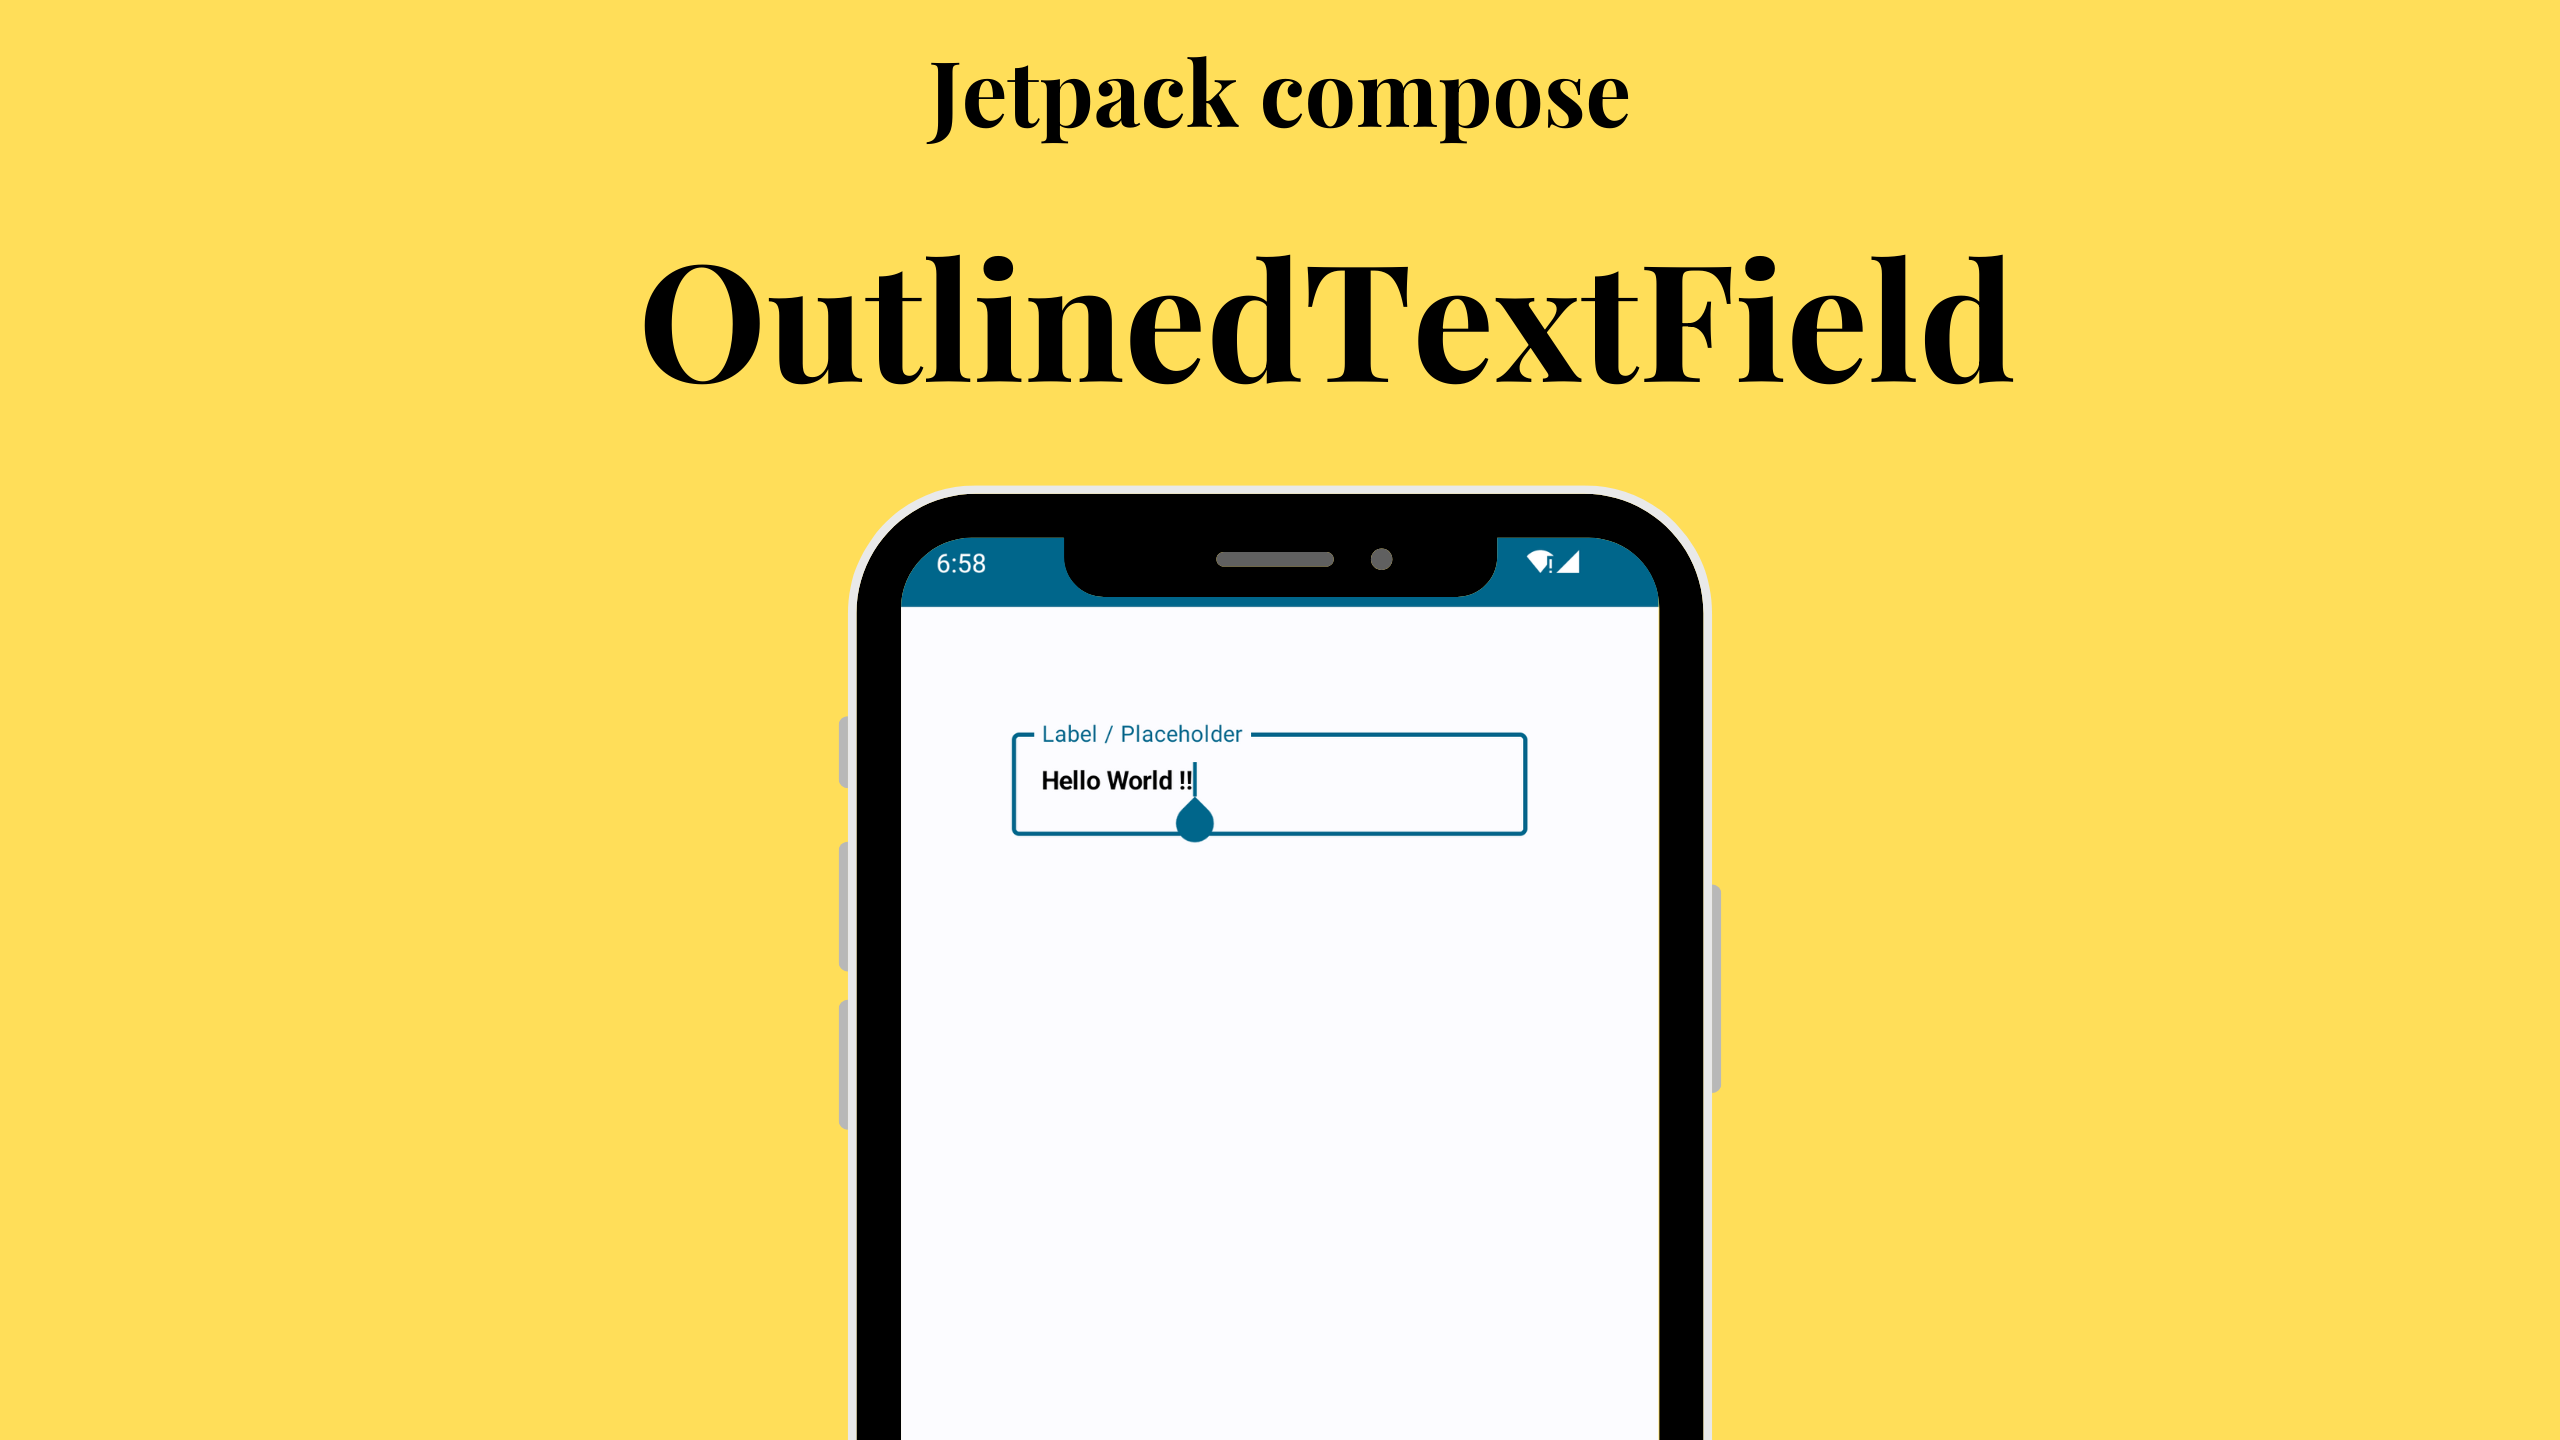 jetpack compose OutlinedTextField TextField